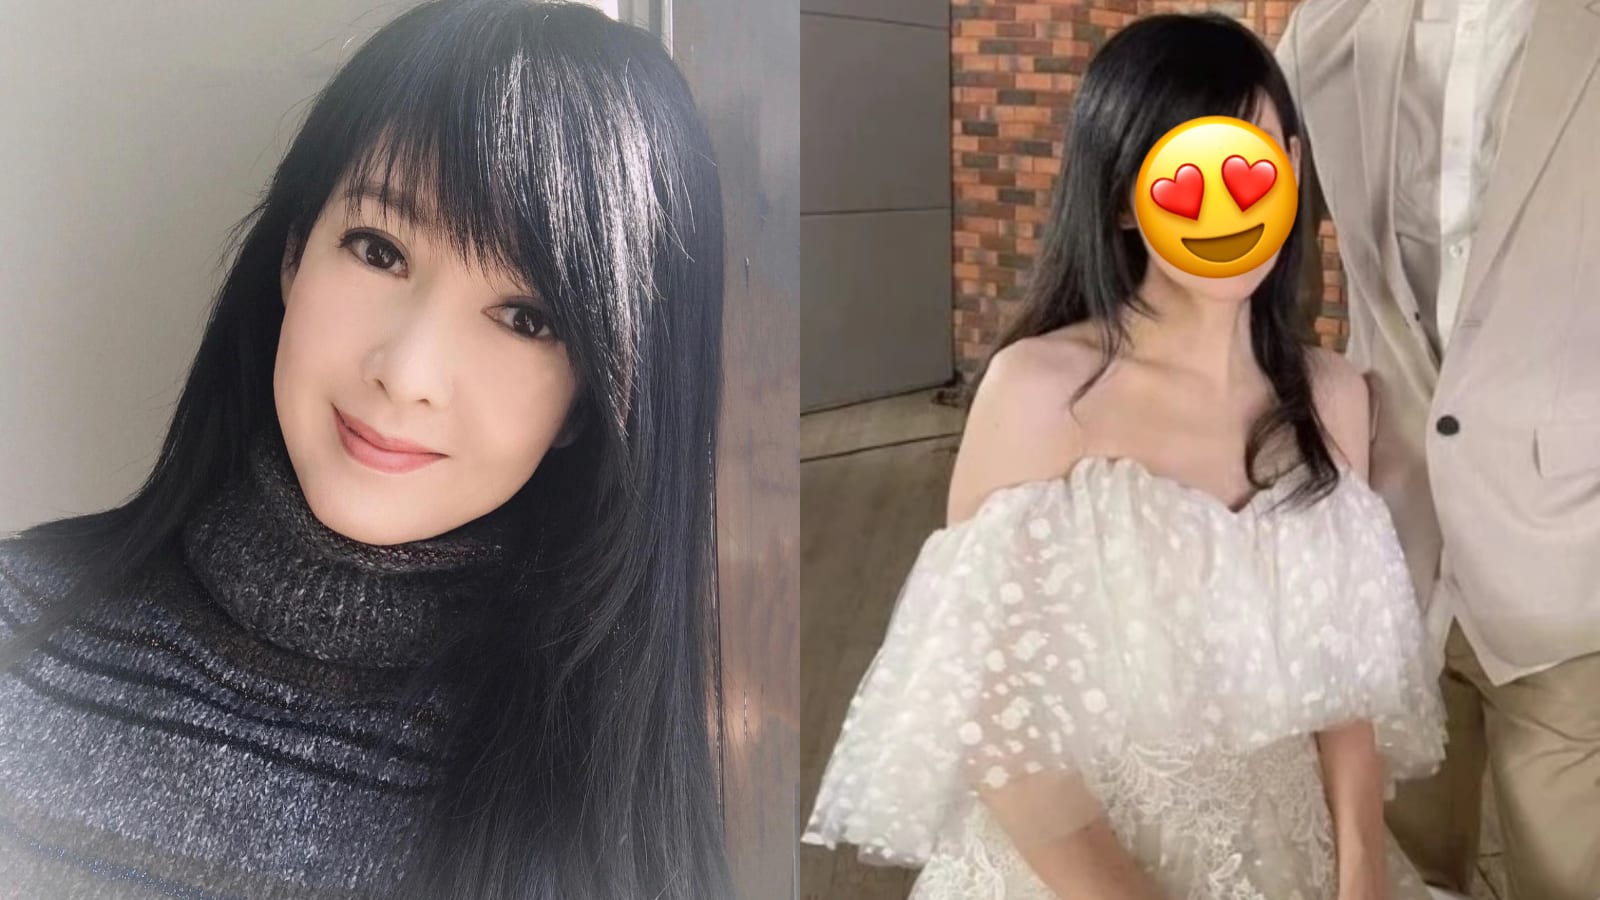 Netizens Amazed At How Youthful Vivian Chow, Who’s Almost 54, Looks In New Unretouched Photos